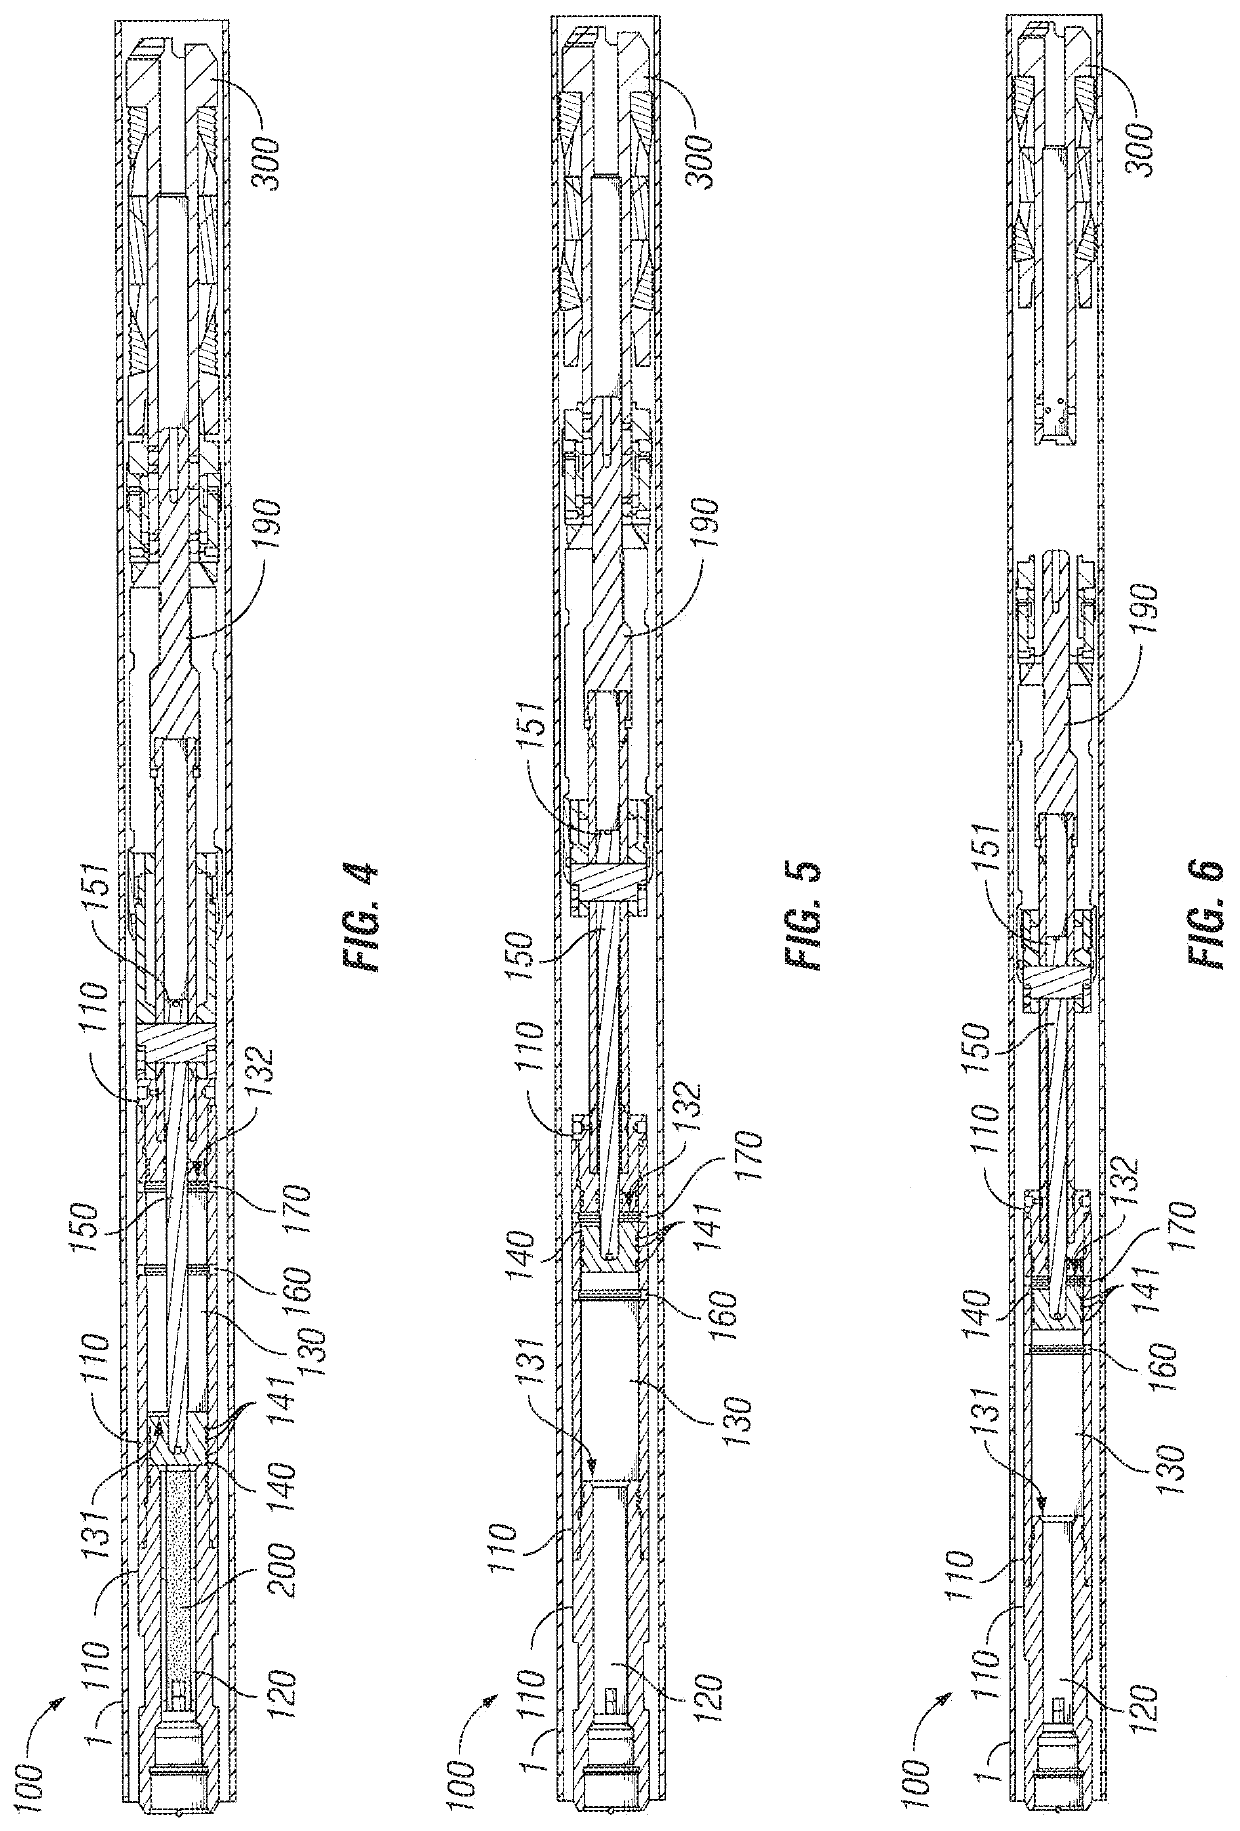 Self Venting Setting Tool That Utilizes Wellbore Fluid to Dampen Setting Motion